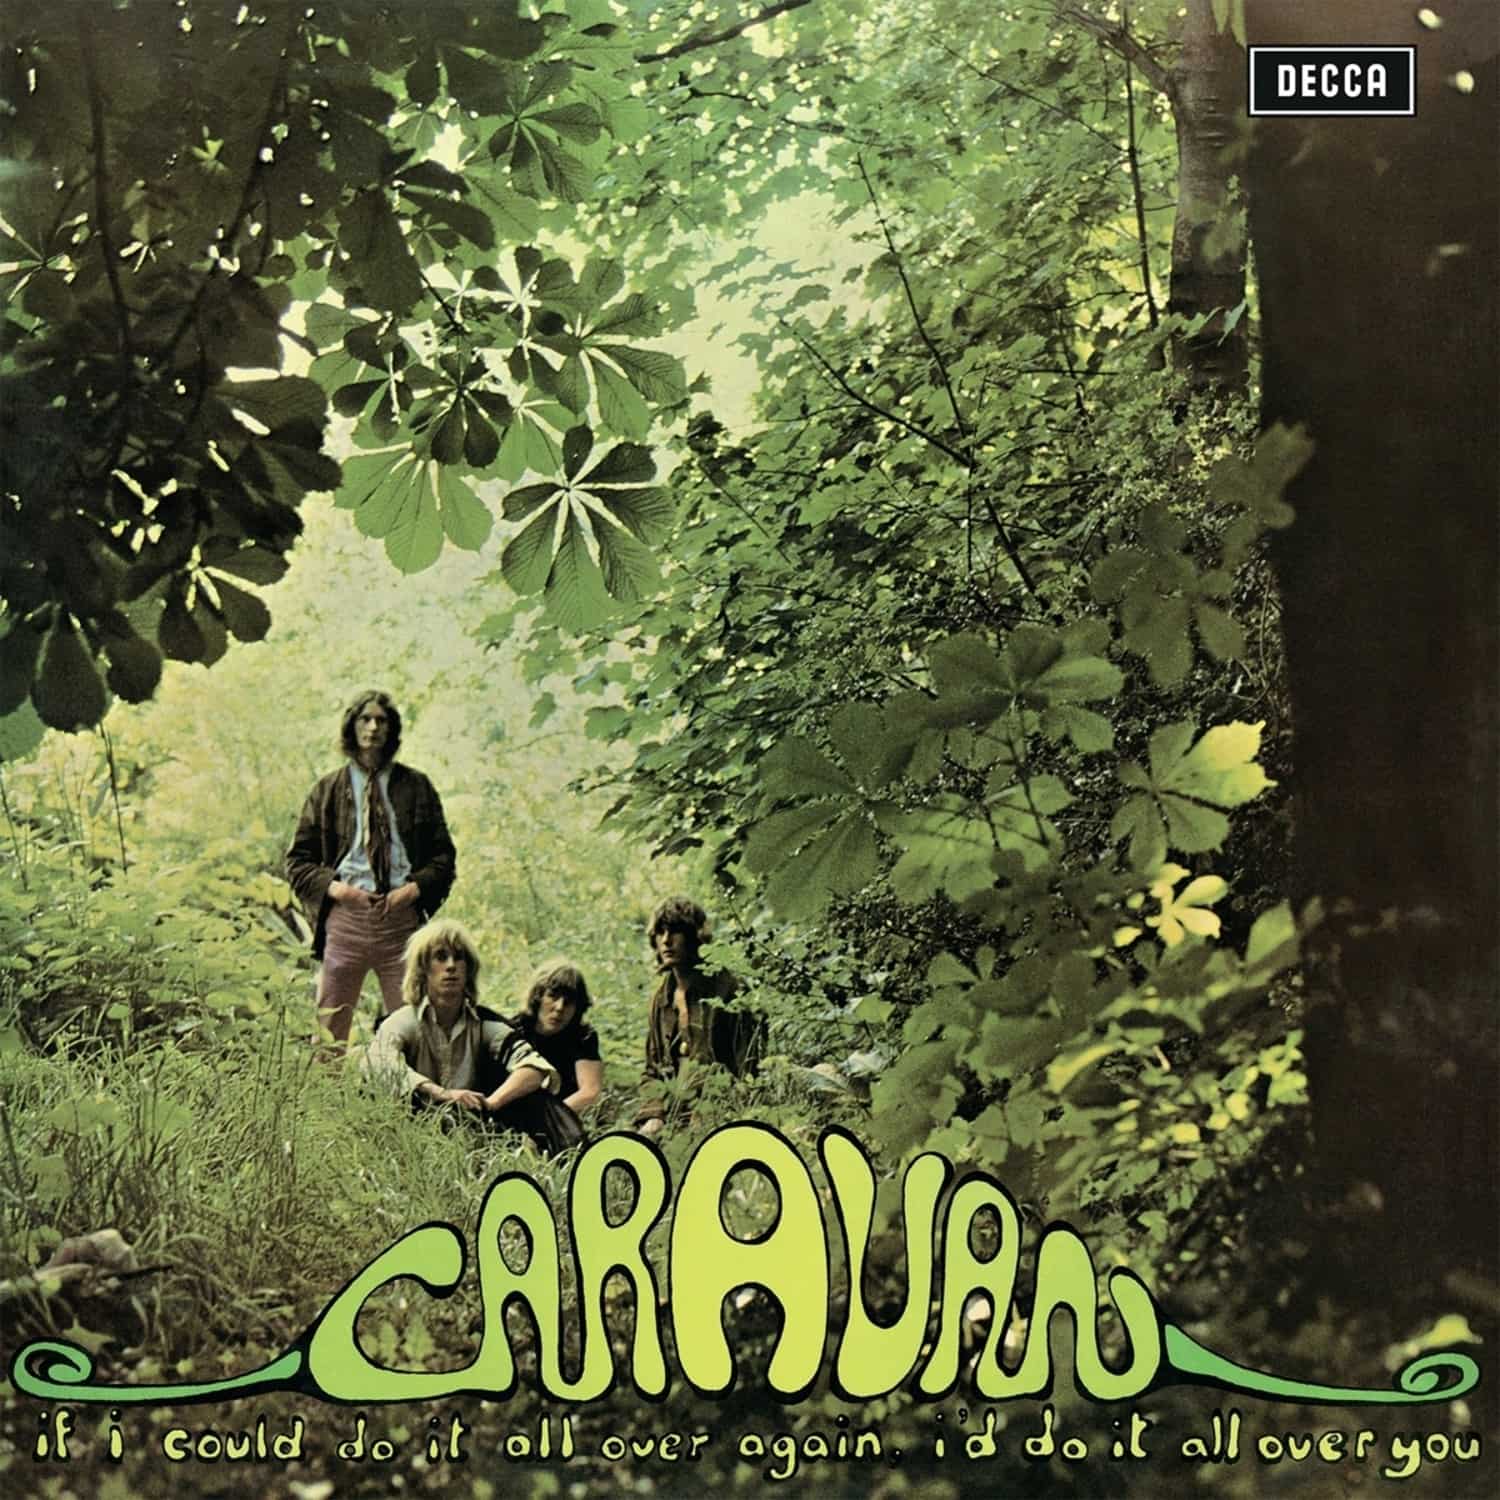 Caravan - IF I COULD DO IT ALL OVER AGAIN, I D DO IT ALL OVE 